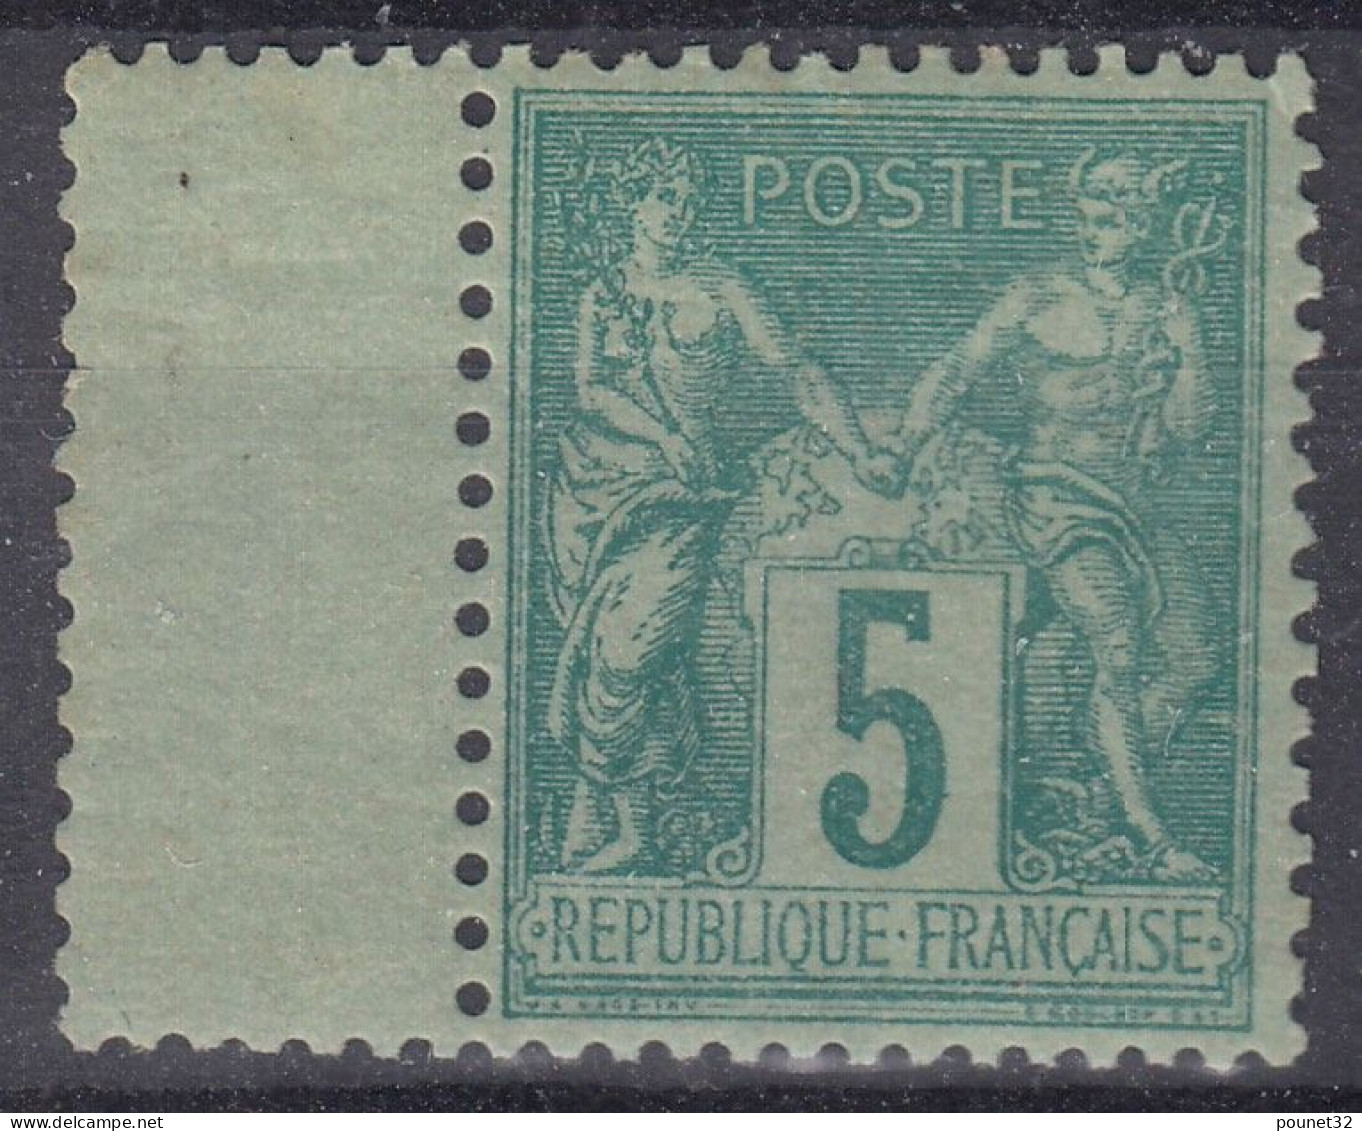 TIMBRE FRANCE SAGE N° 75 RARE RECTO VERSO PARTIEL NEUF * GOMME TRACE CHARNIERE - 1876-1898 Sage (Type II)